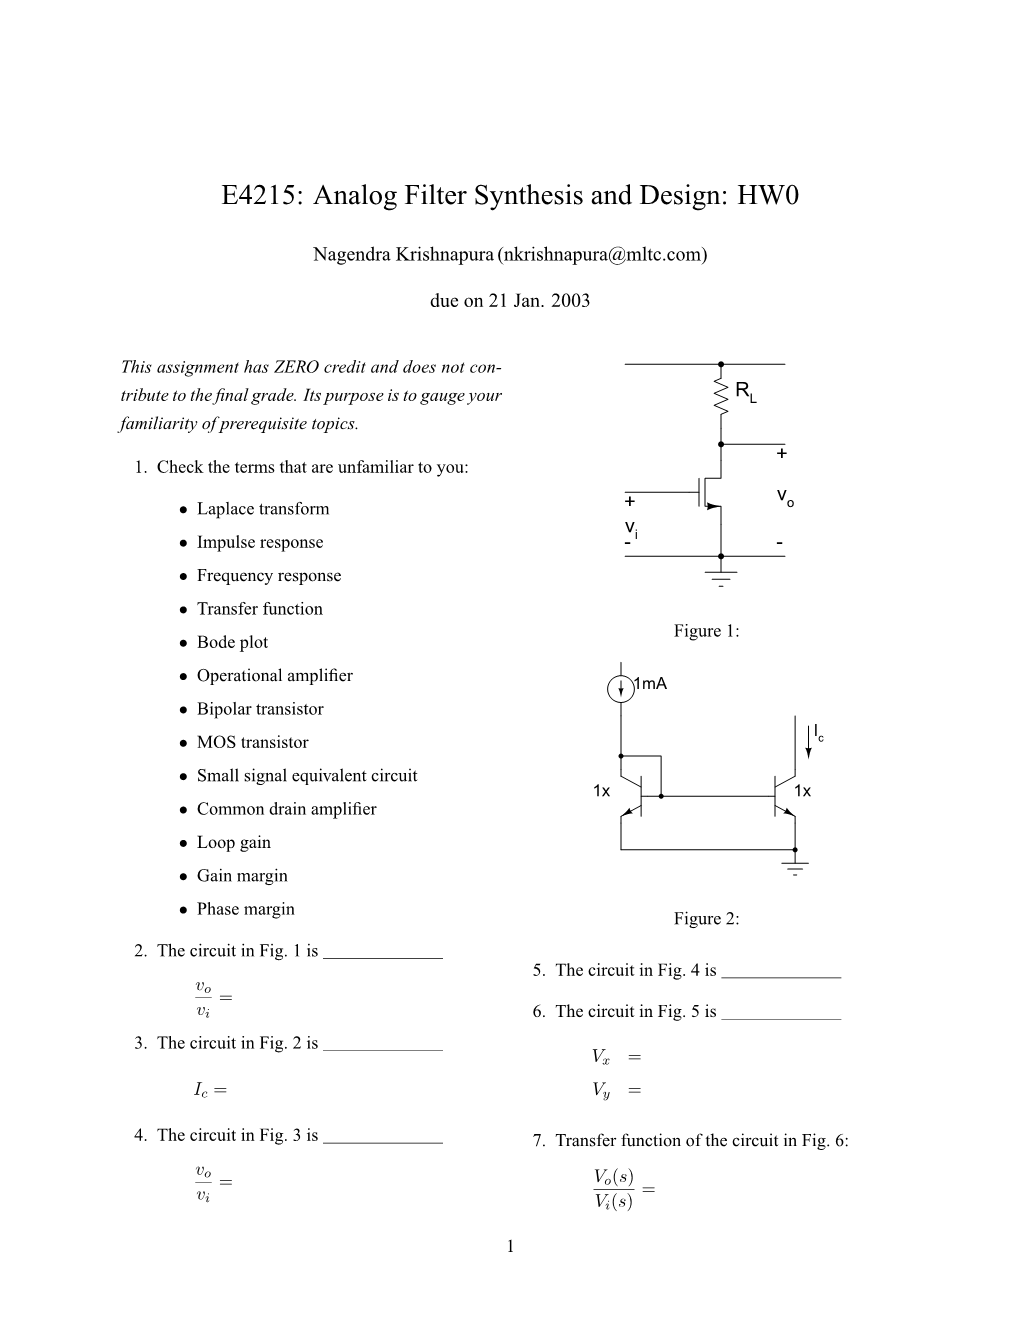 E4215: Analog Filter Synthesis and Design: HW0